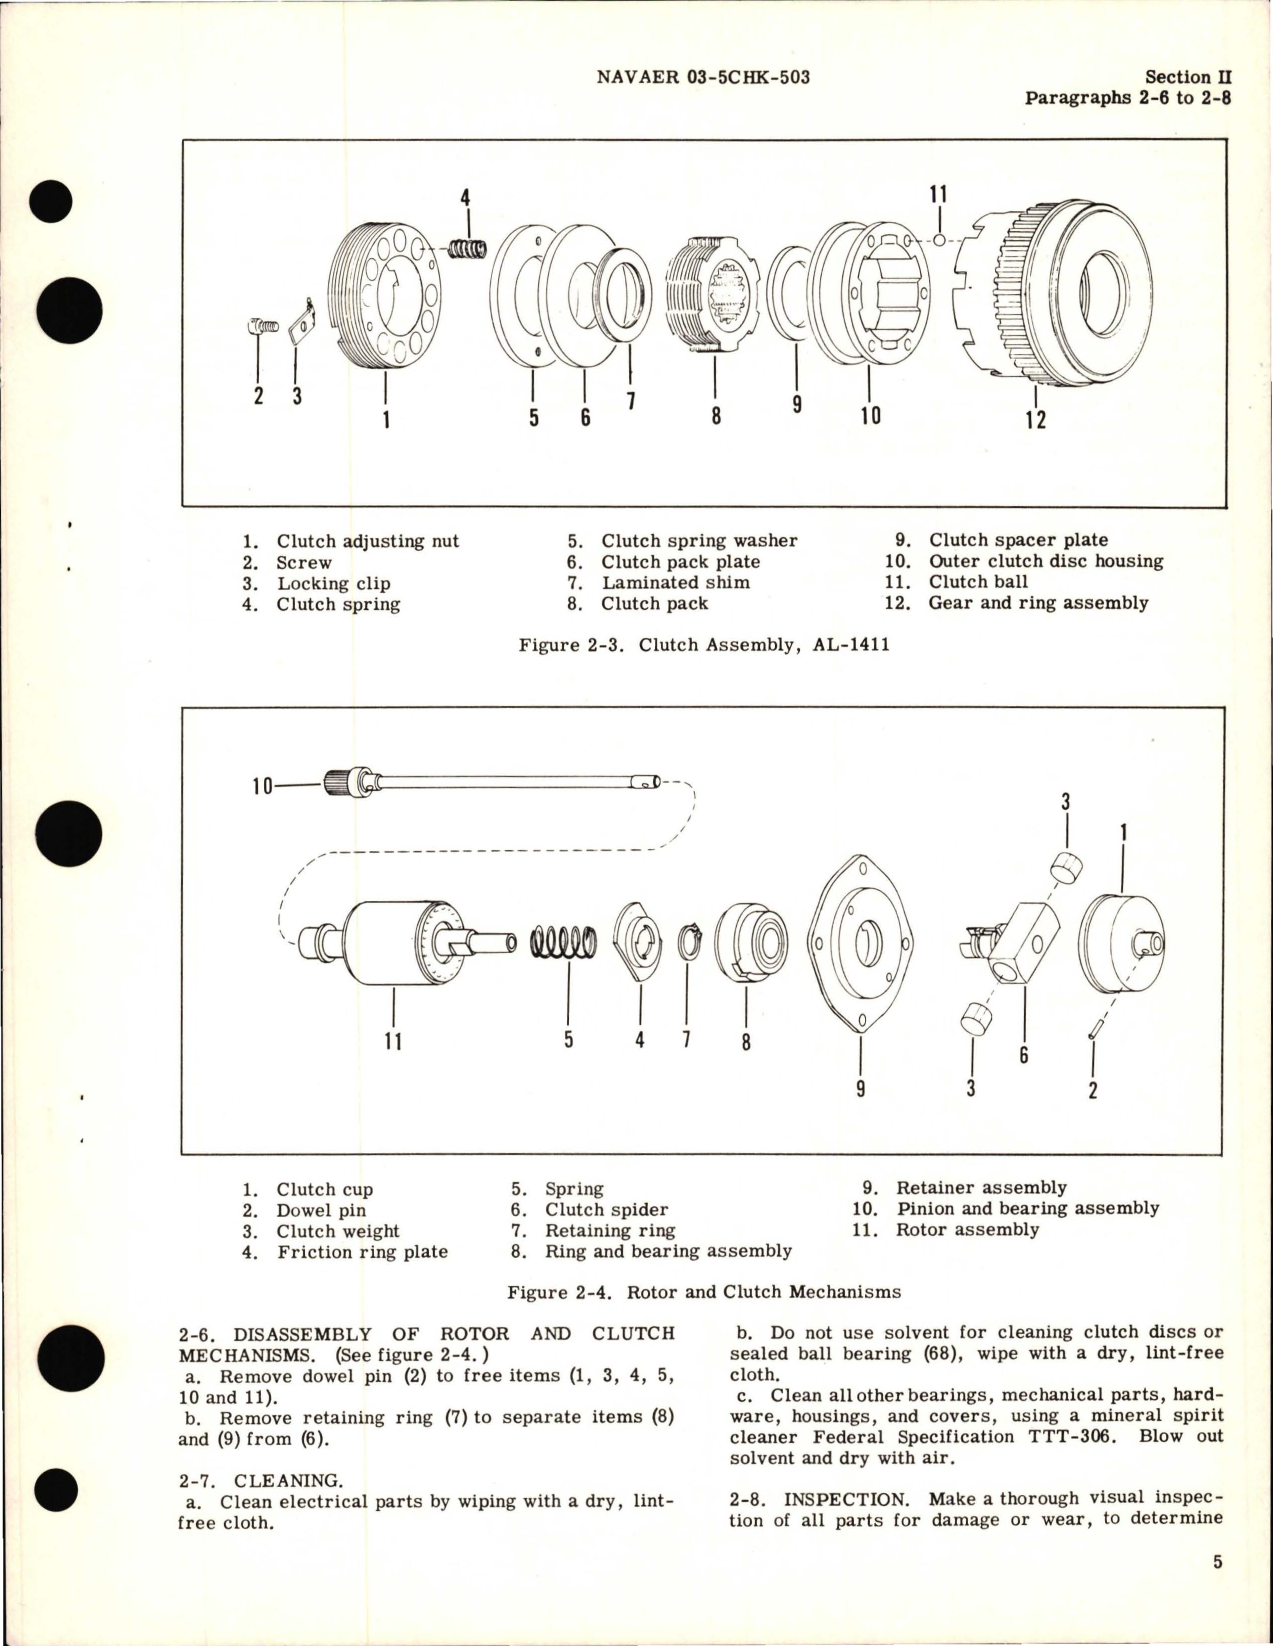 Sample page 7 from AirCorps Library document: Overhaul Instructions for Actuator Assy - Elevator Trim Tab Part No. AL-1287-14, Type 304-1-A